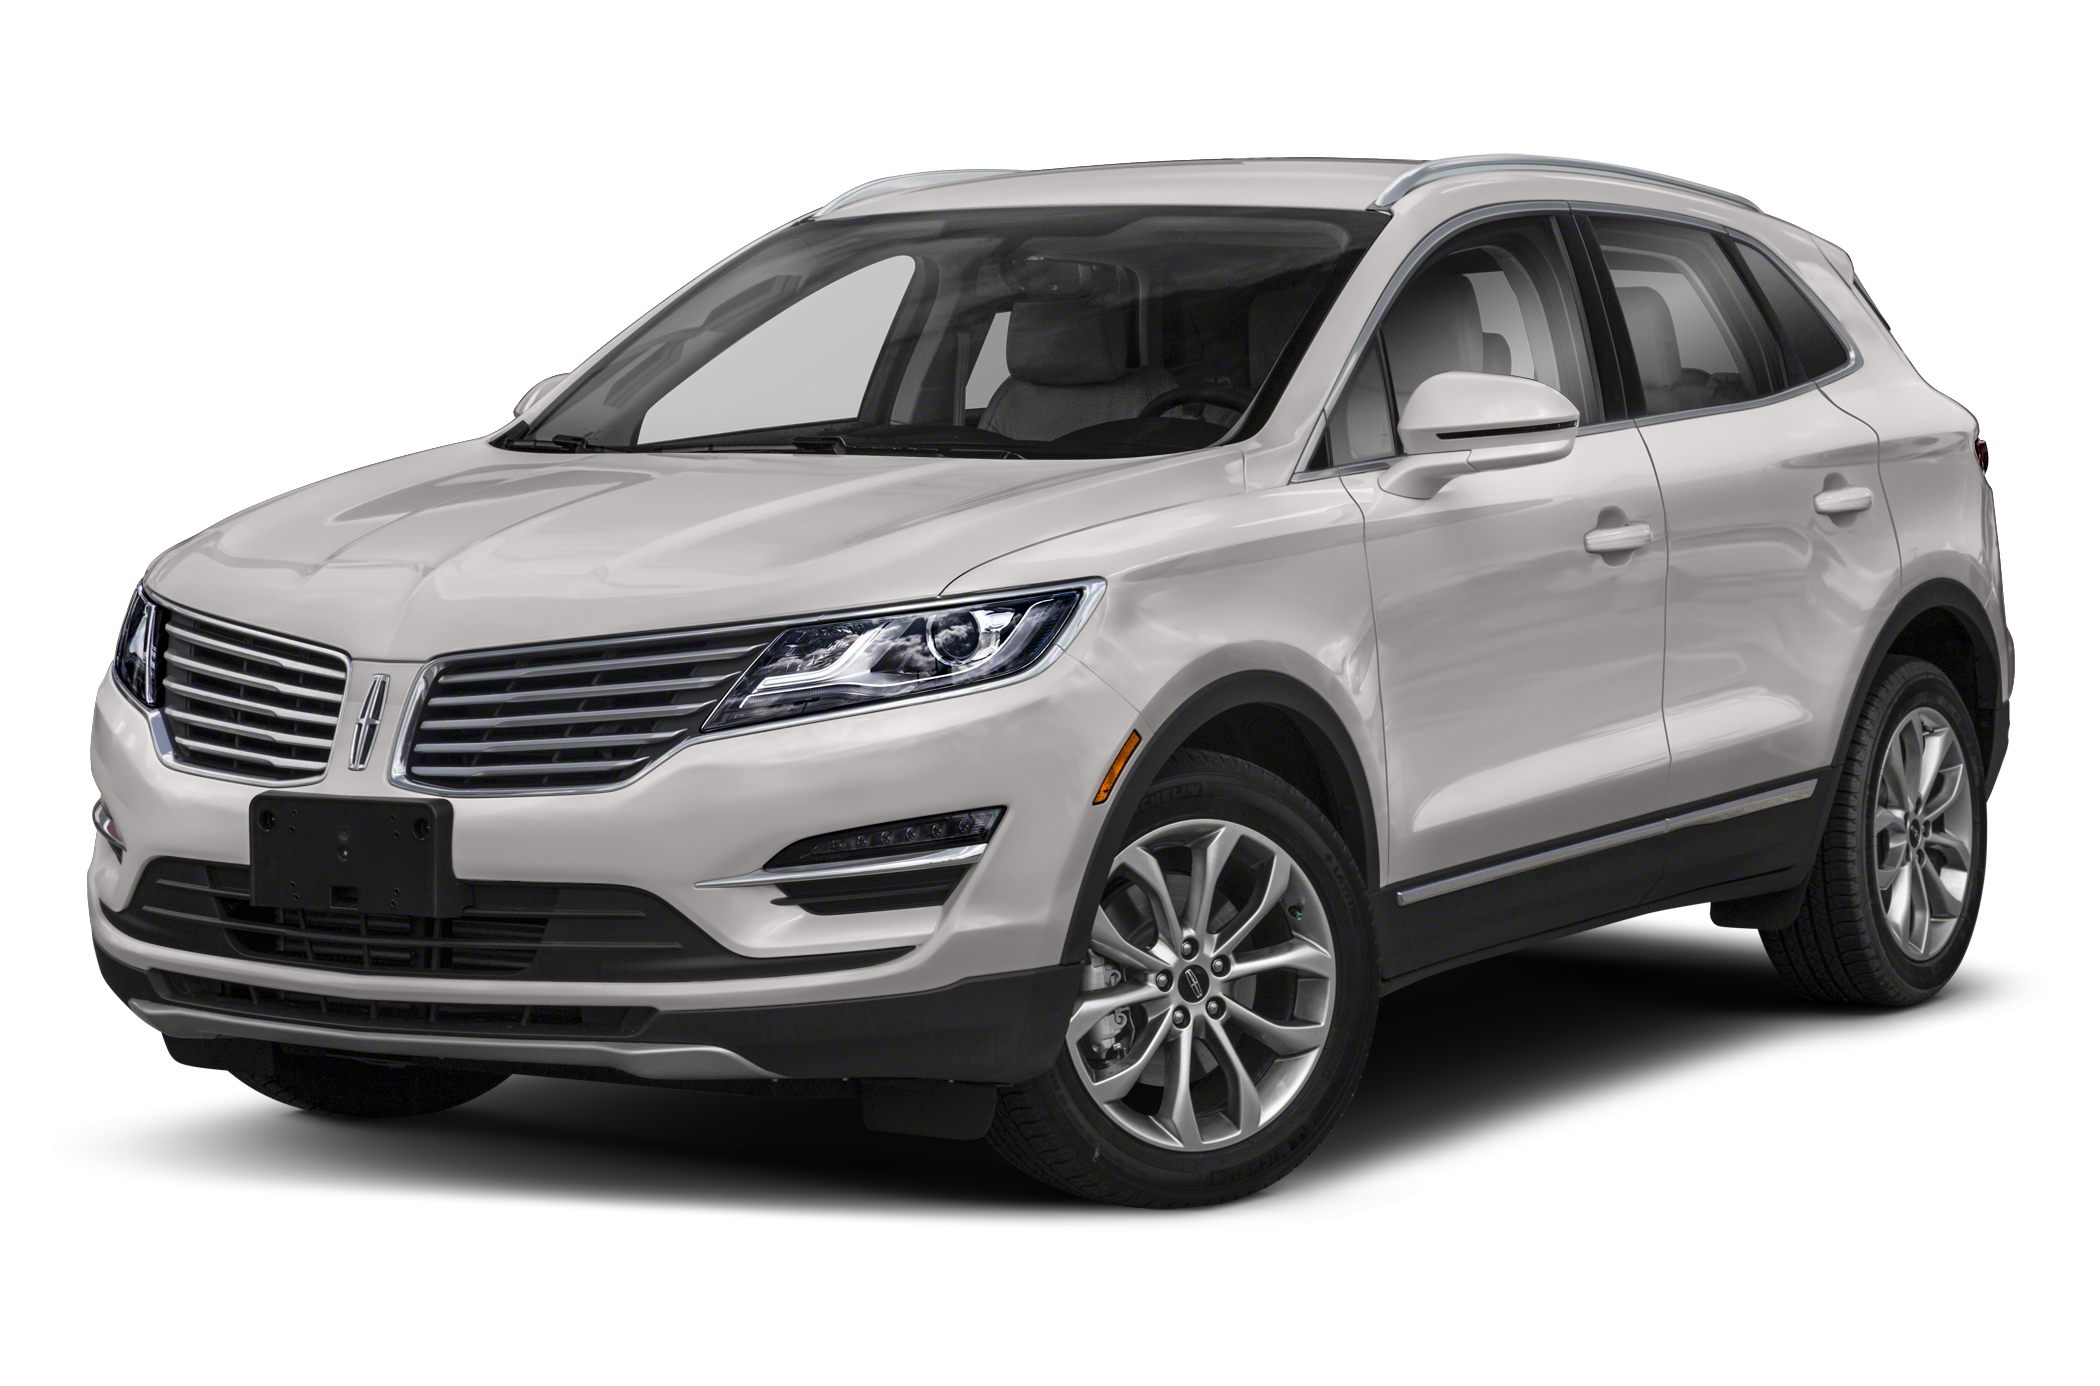 2018 Lincoln Mkc Pictures